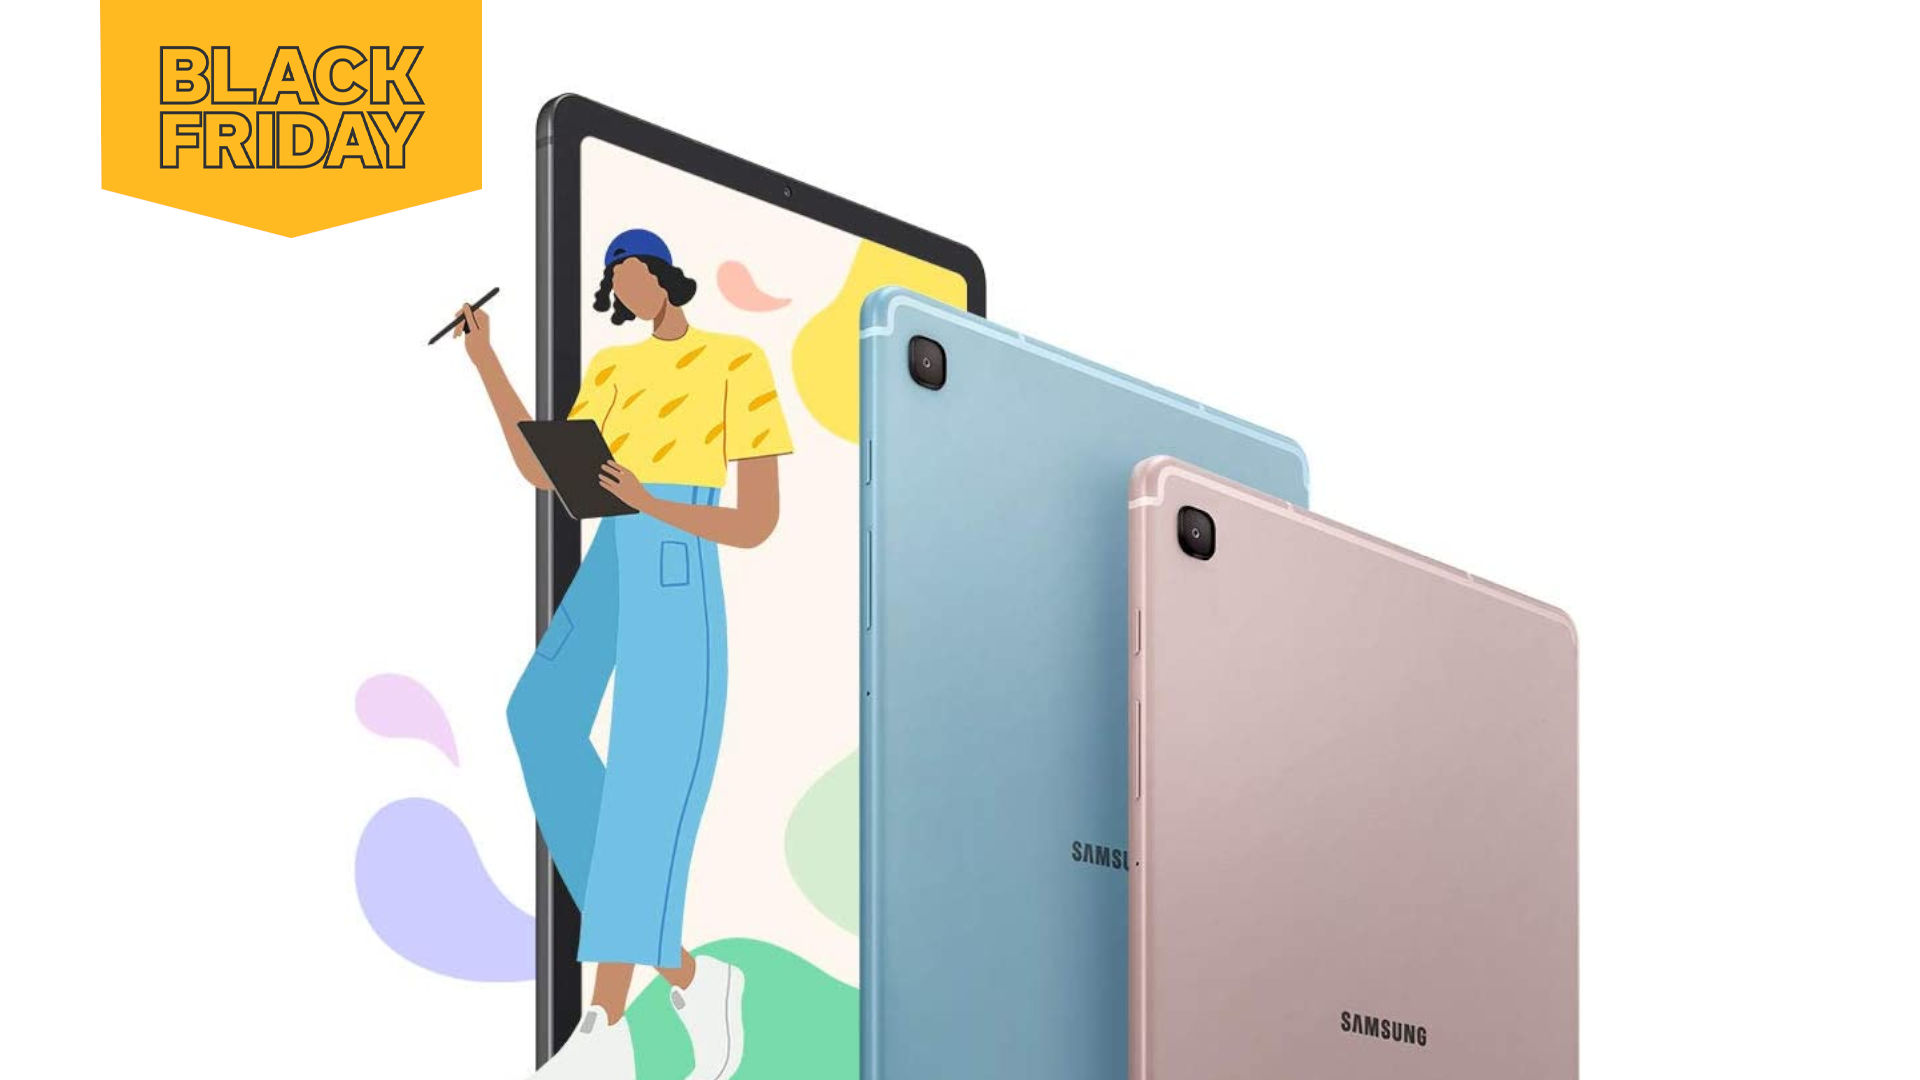 Snag The Samsung Galaxy Tab S6 For Up To 29% Off thumbnail